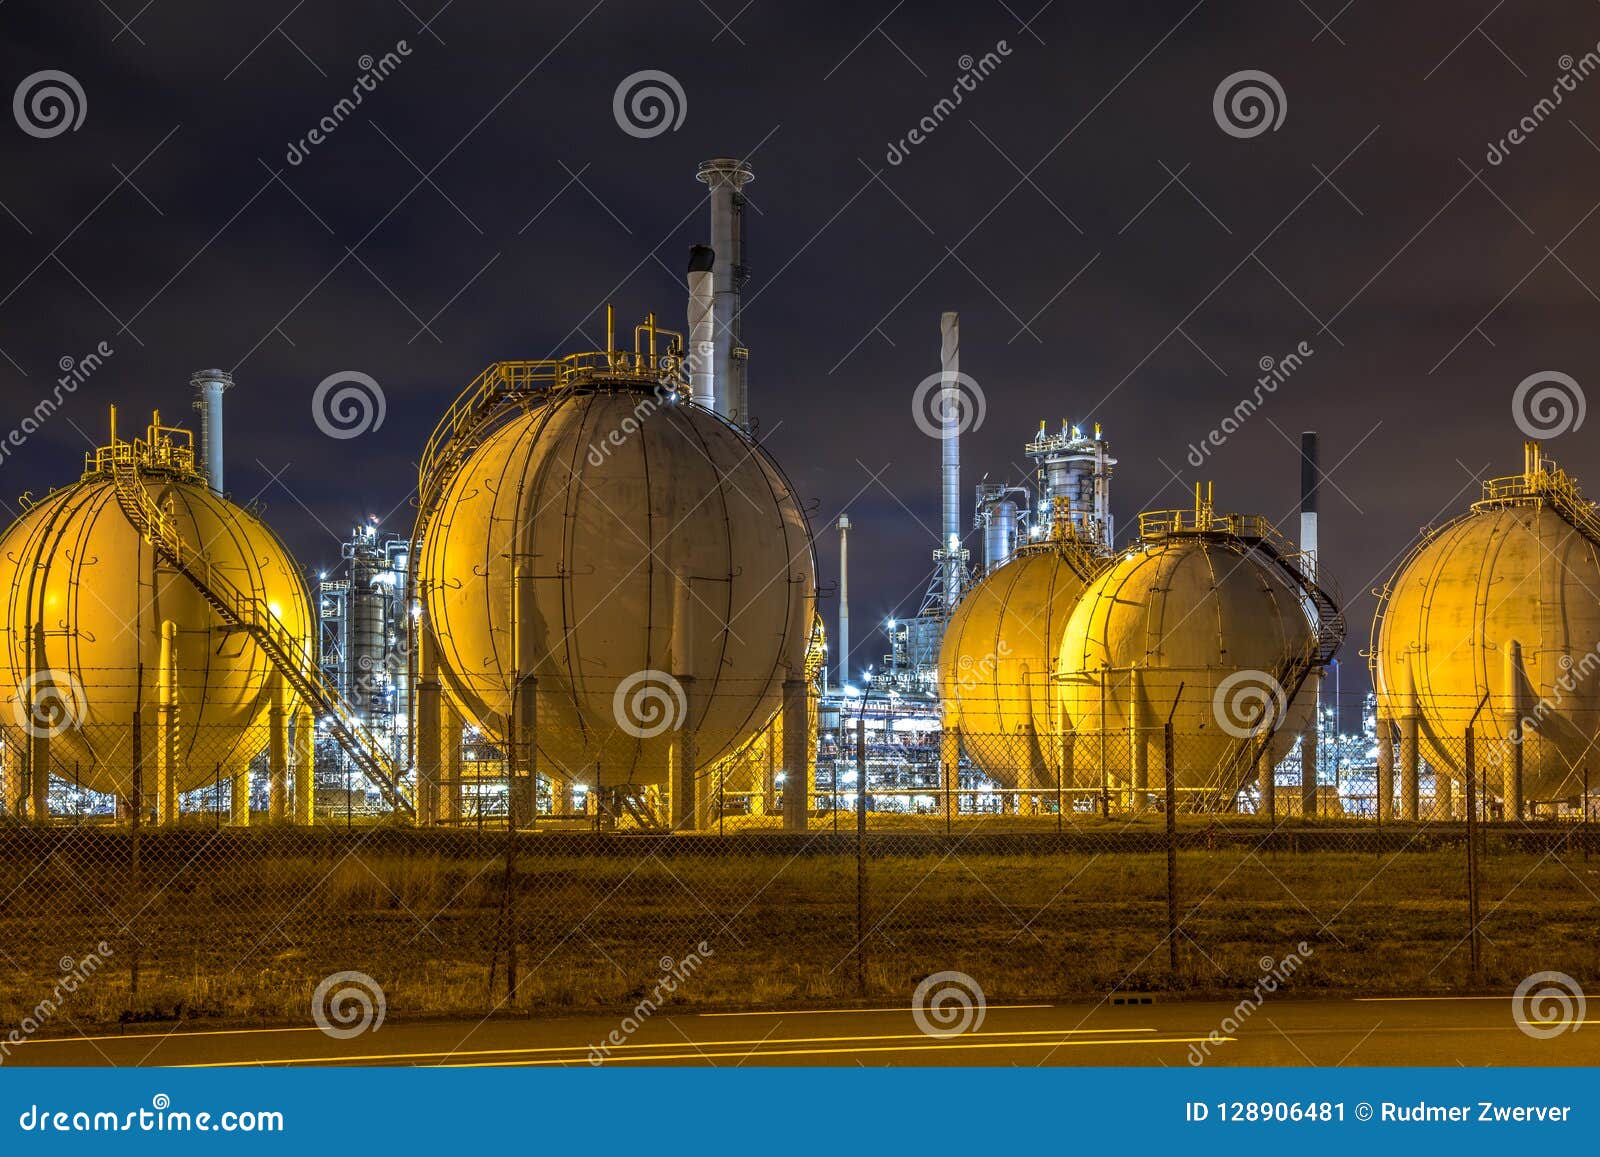 liquid natural gas globe containers